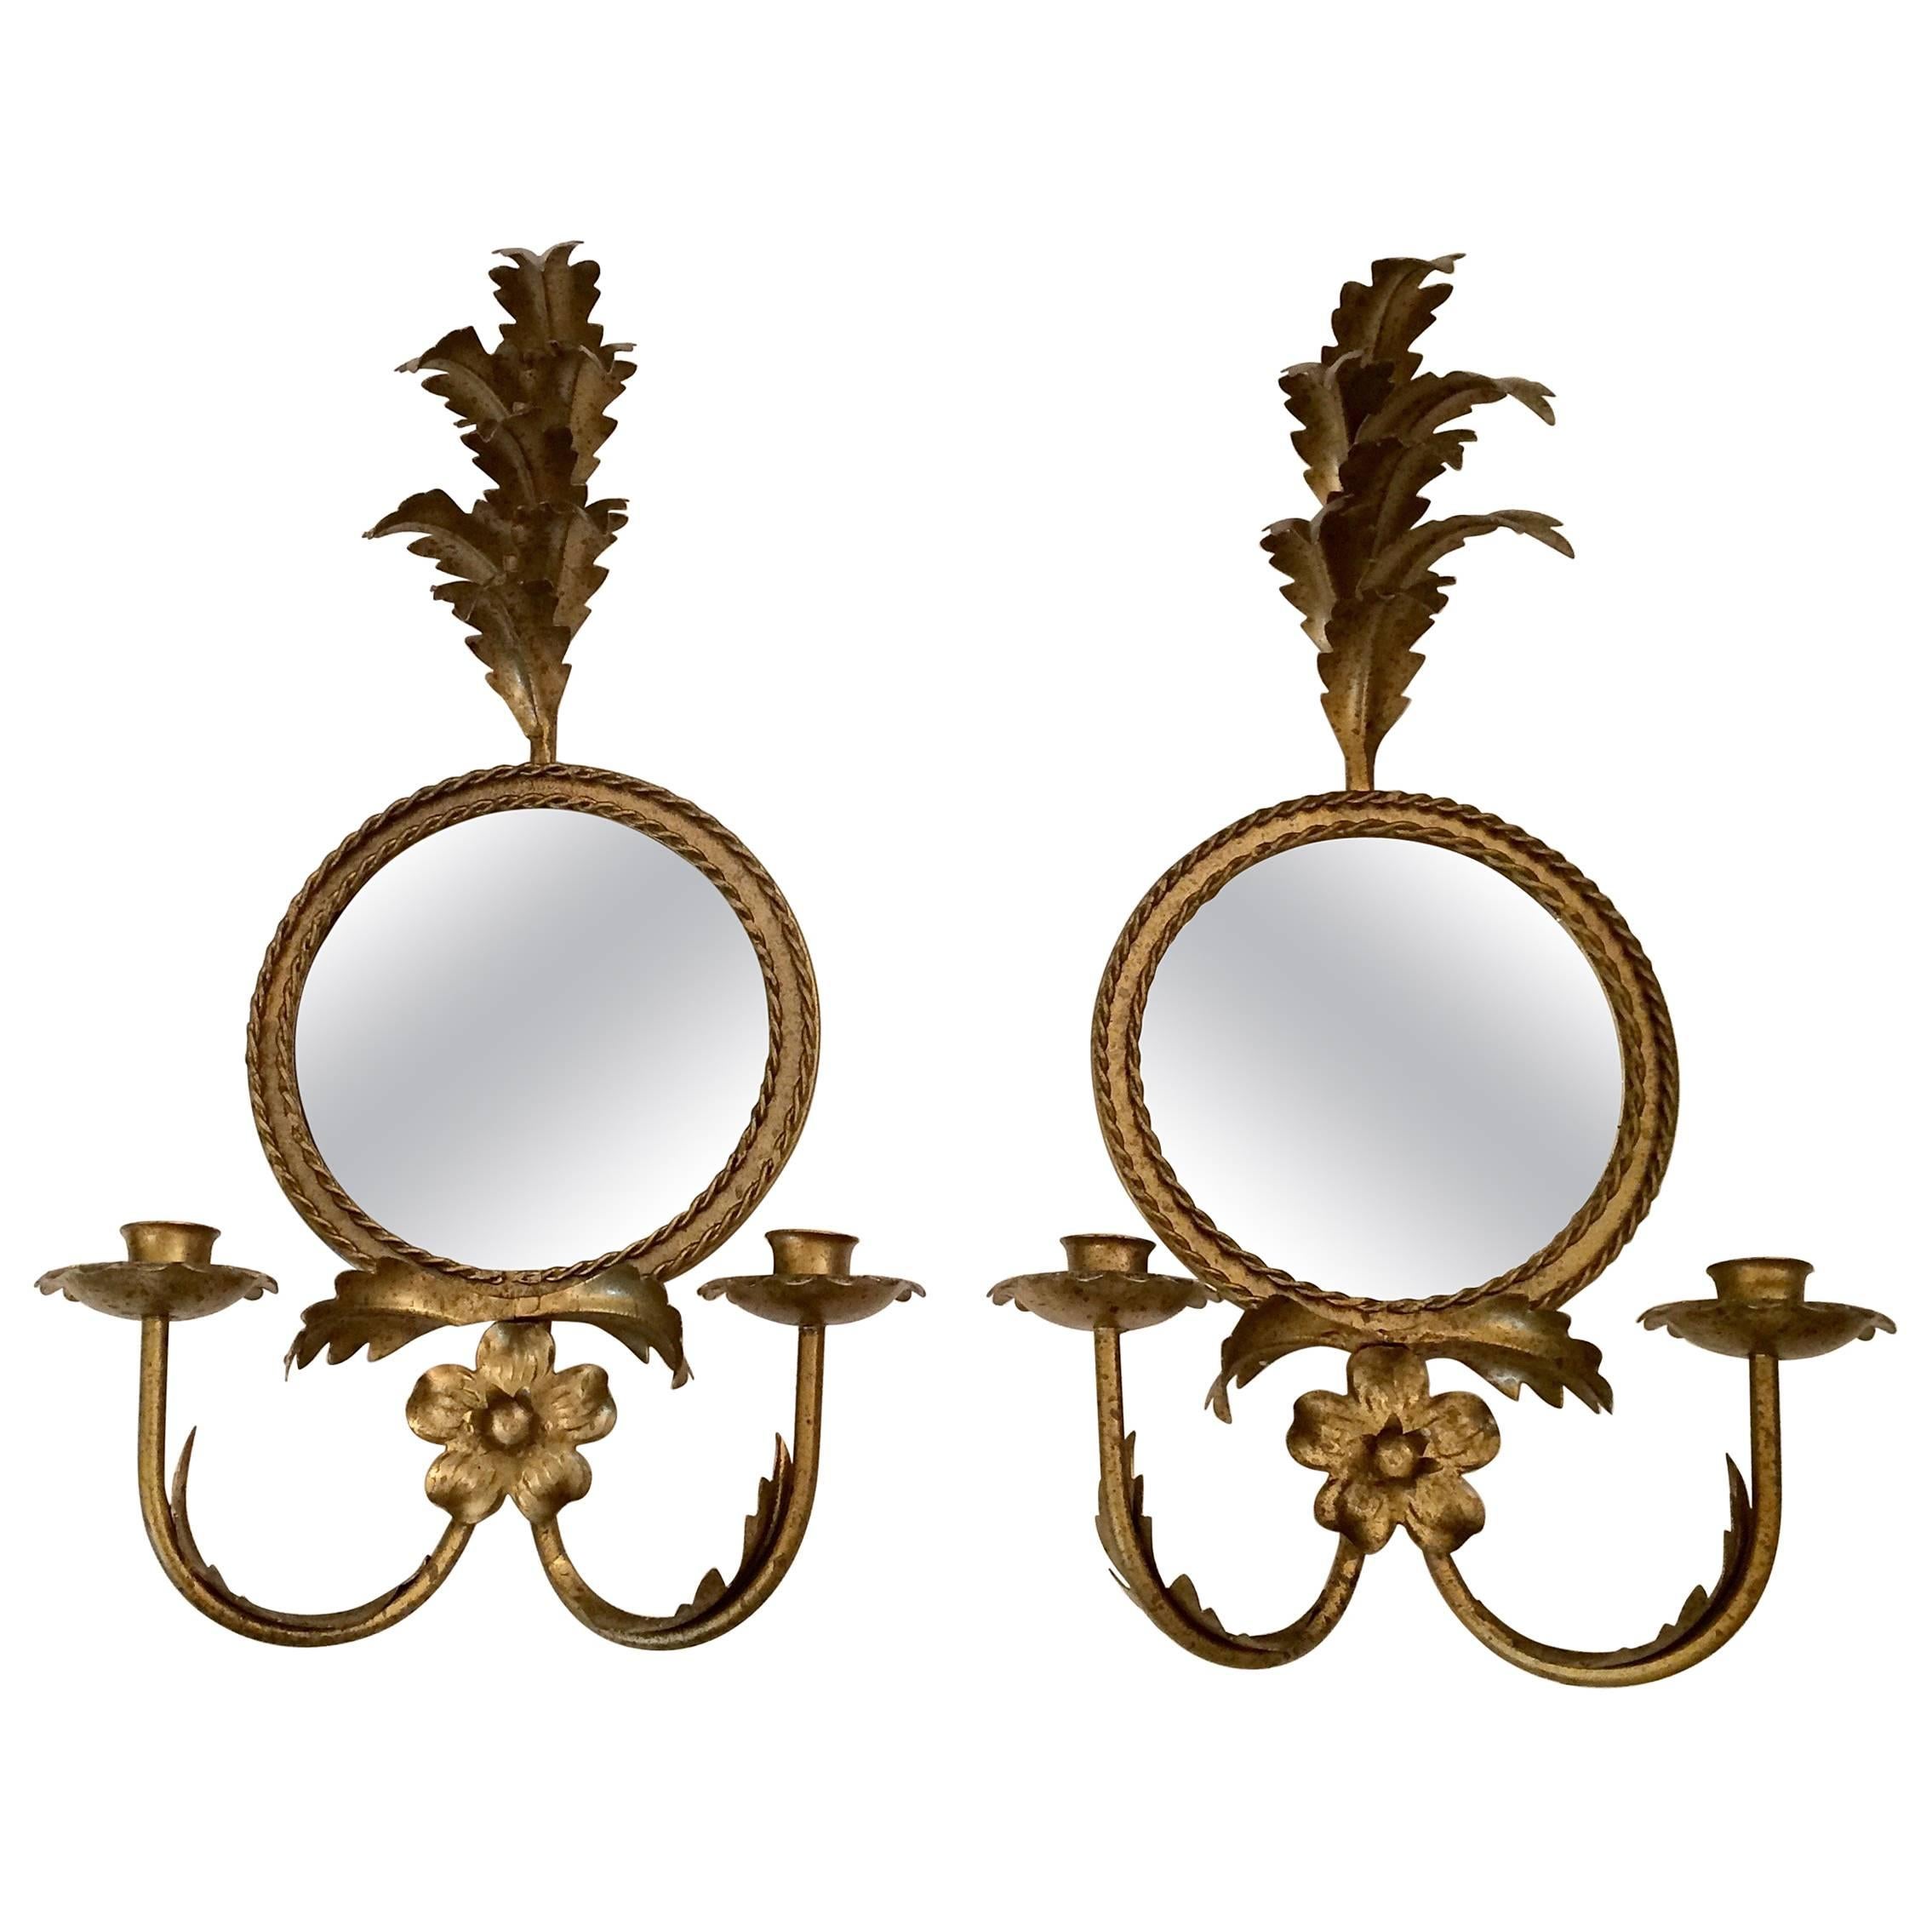 Pair of Lovely Italian Giltiron and Tole Sconces with Round Mirrors